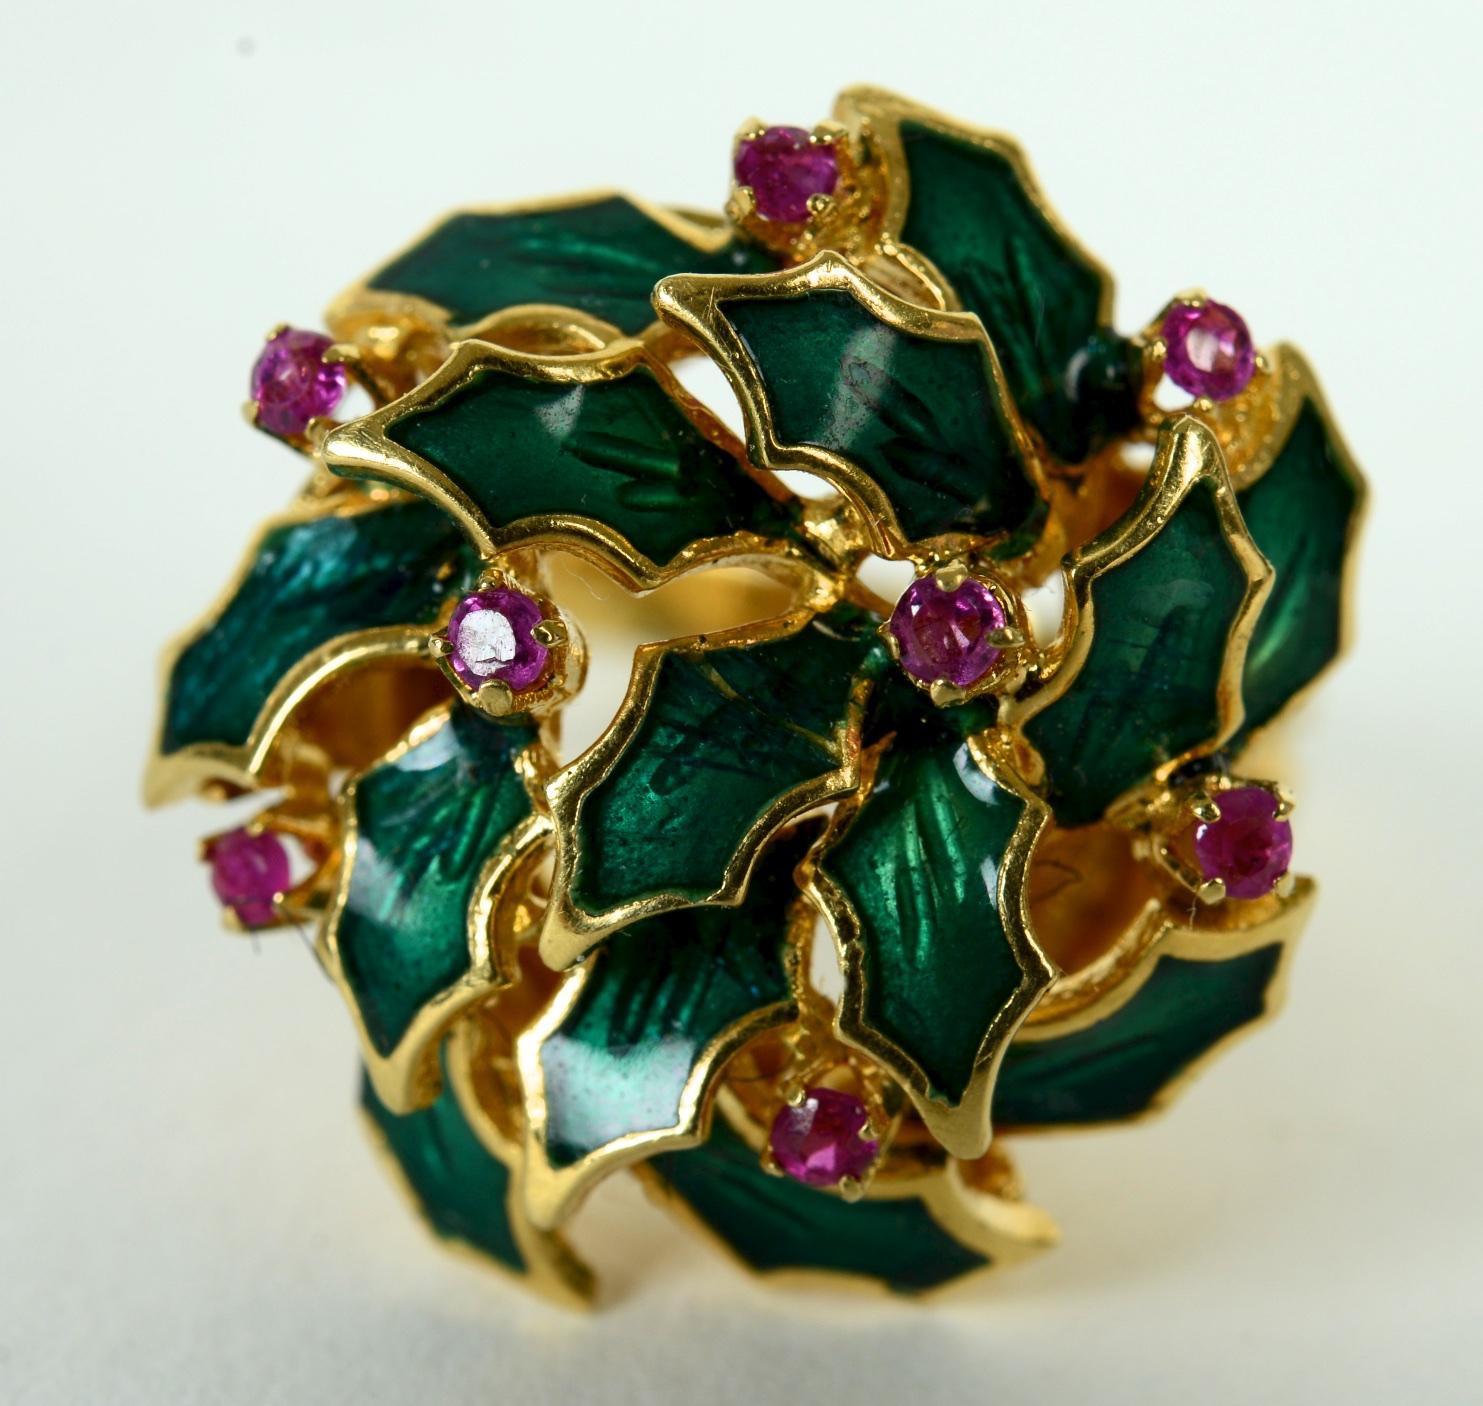 Enameled Ring with Holly and Berry Decoration Set with Pink Topaz in 18K Gold. The enamel with carved green leaves and 8-2mm prong set round dark pink topaz. The ring is hallmarked with a maker's mark and 